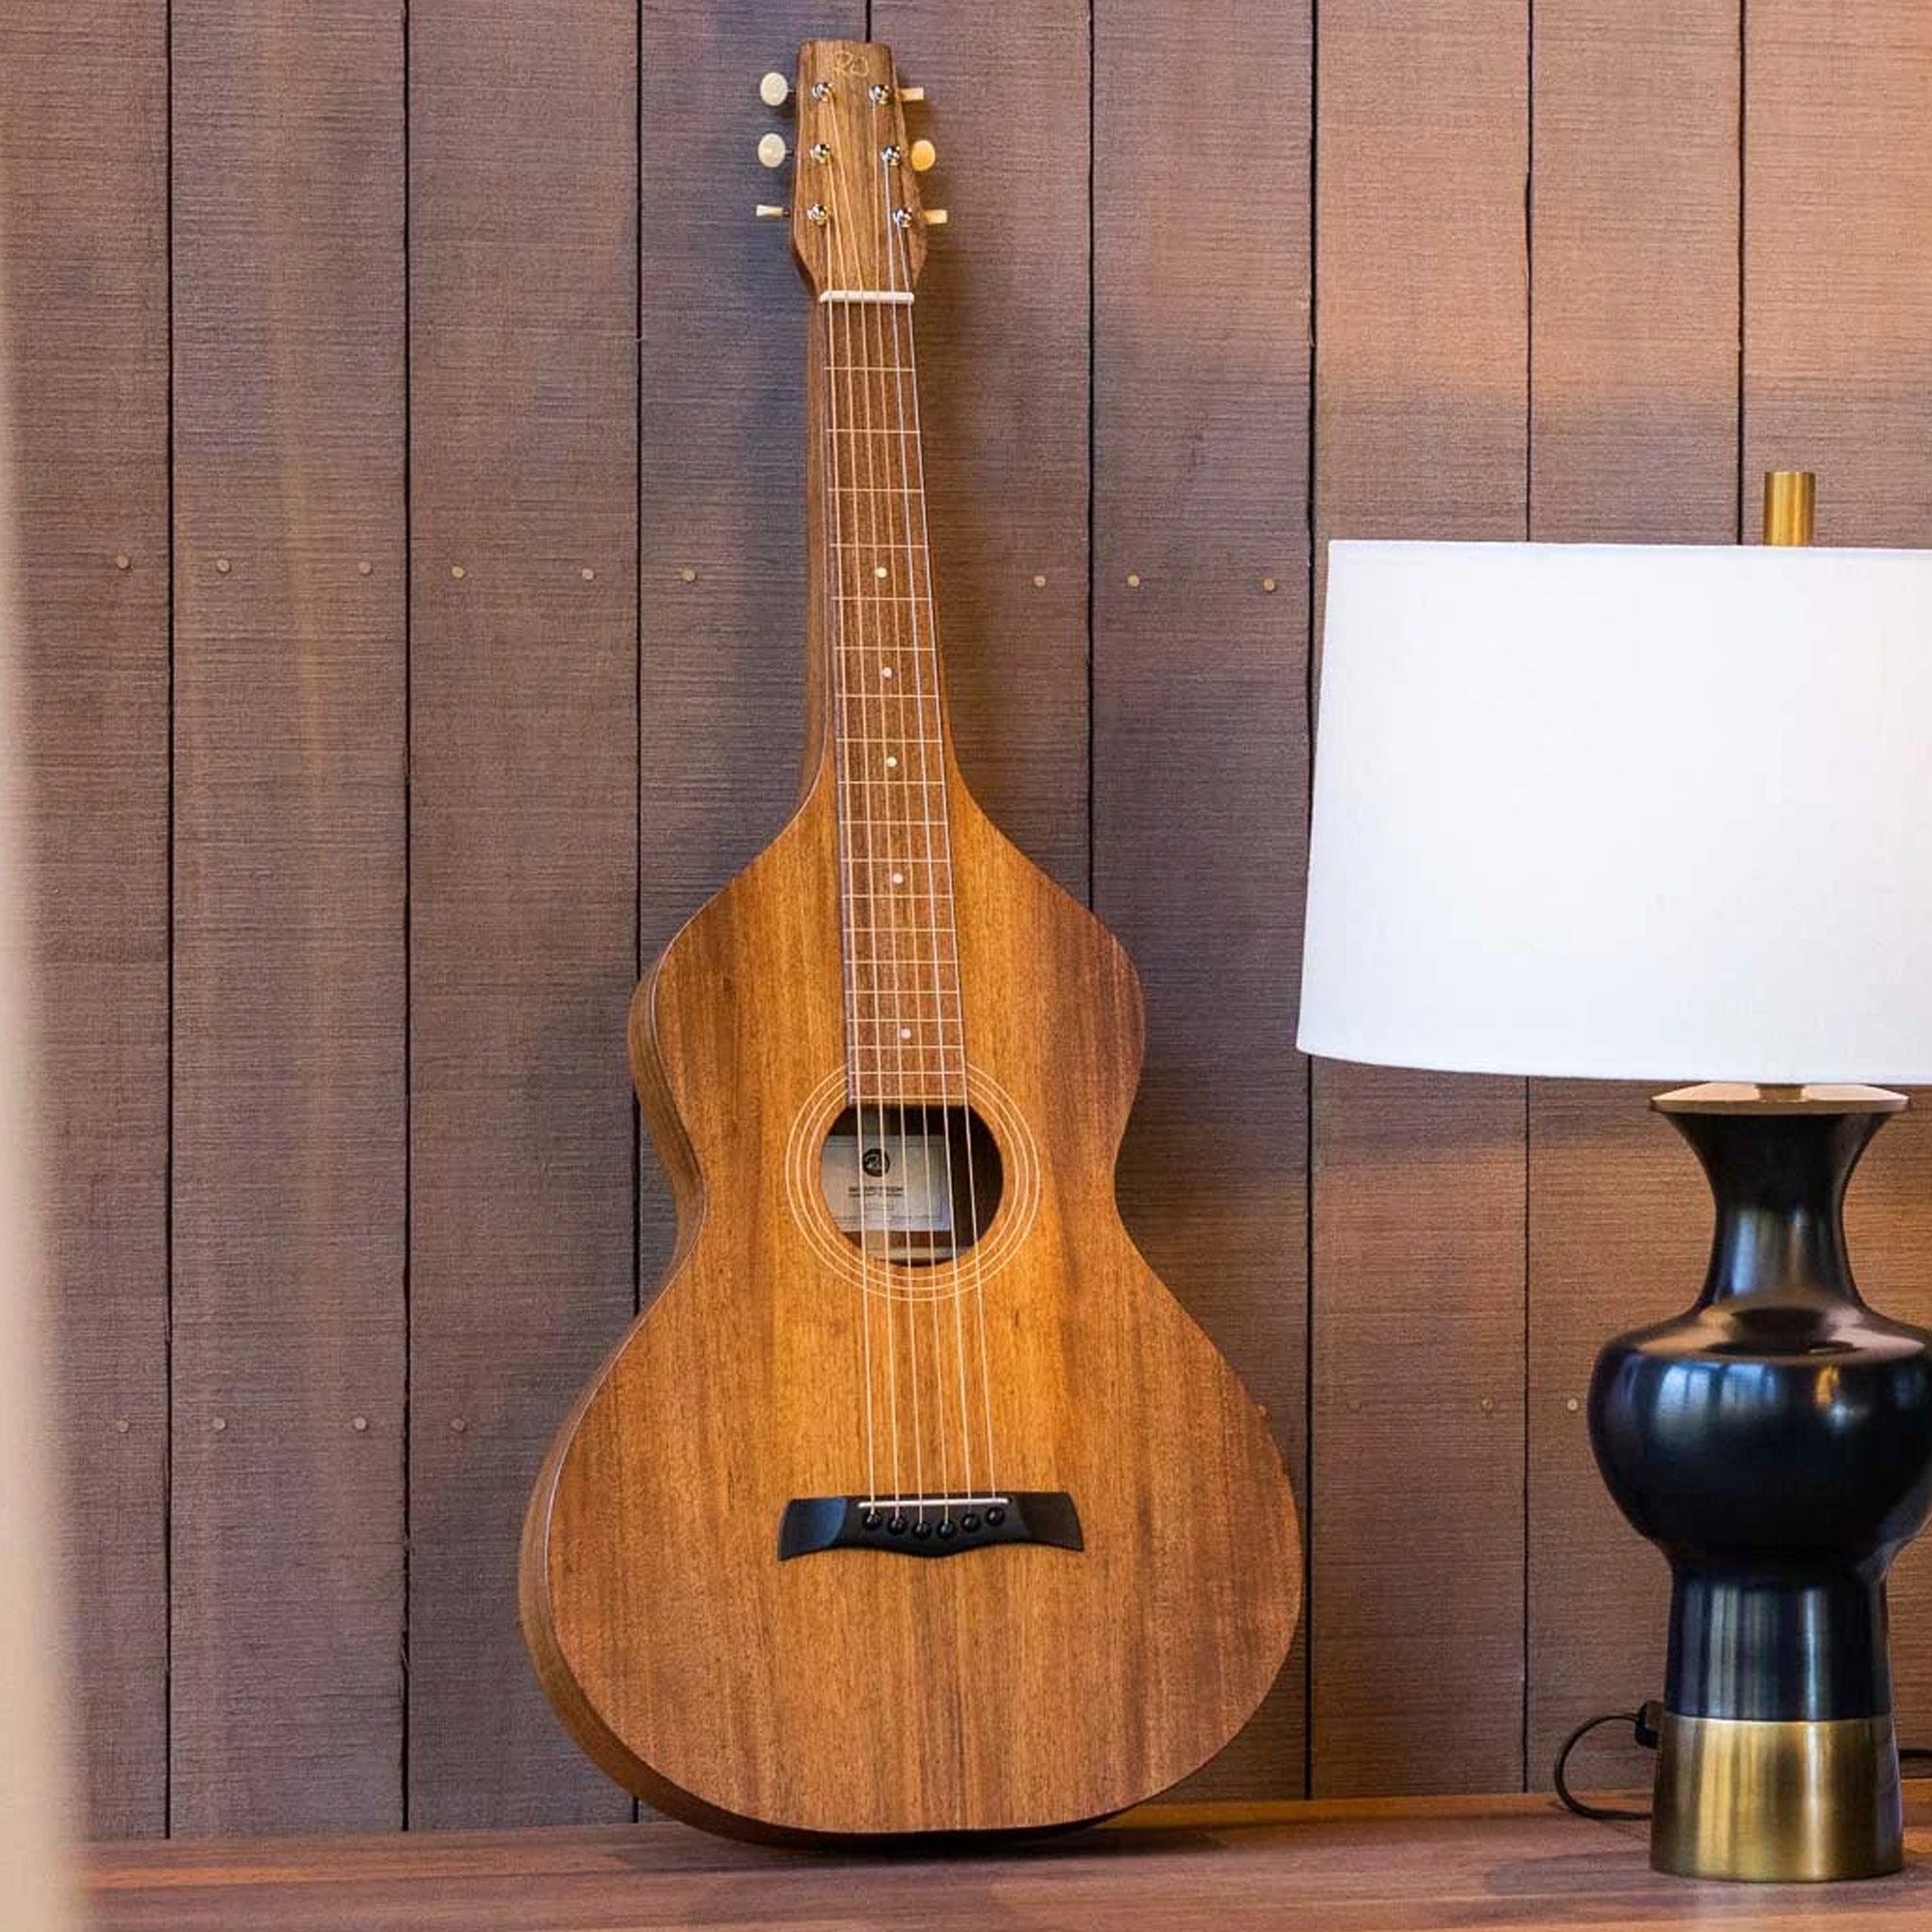 Style 1 Weissenborn Guitar by Richard Wilson against a timber wall with a black lamp